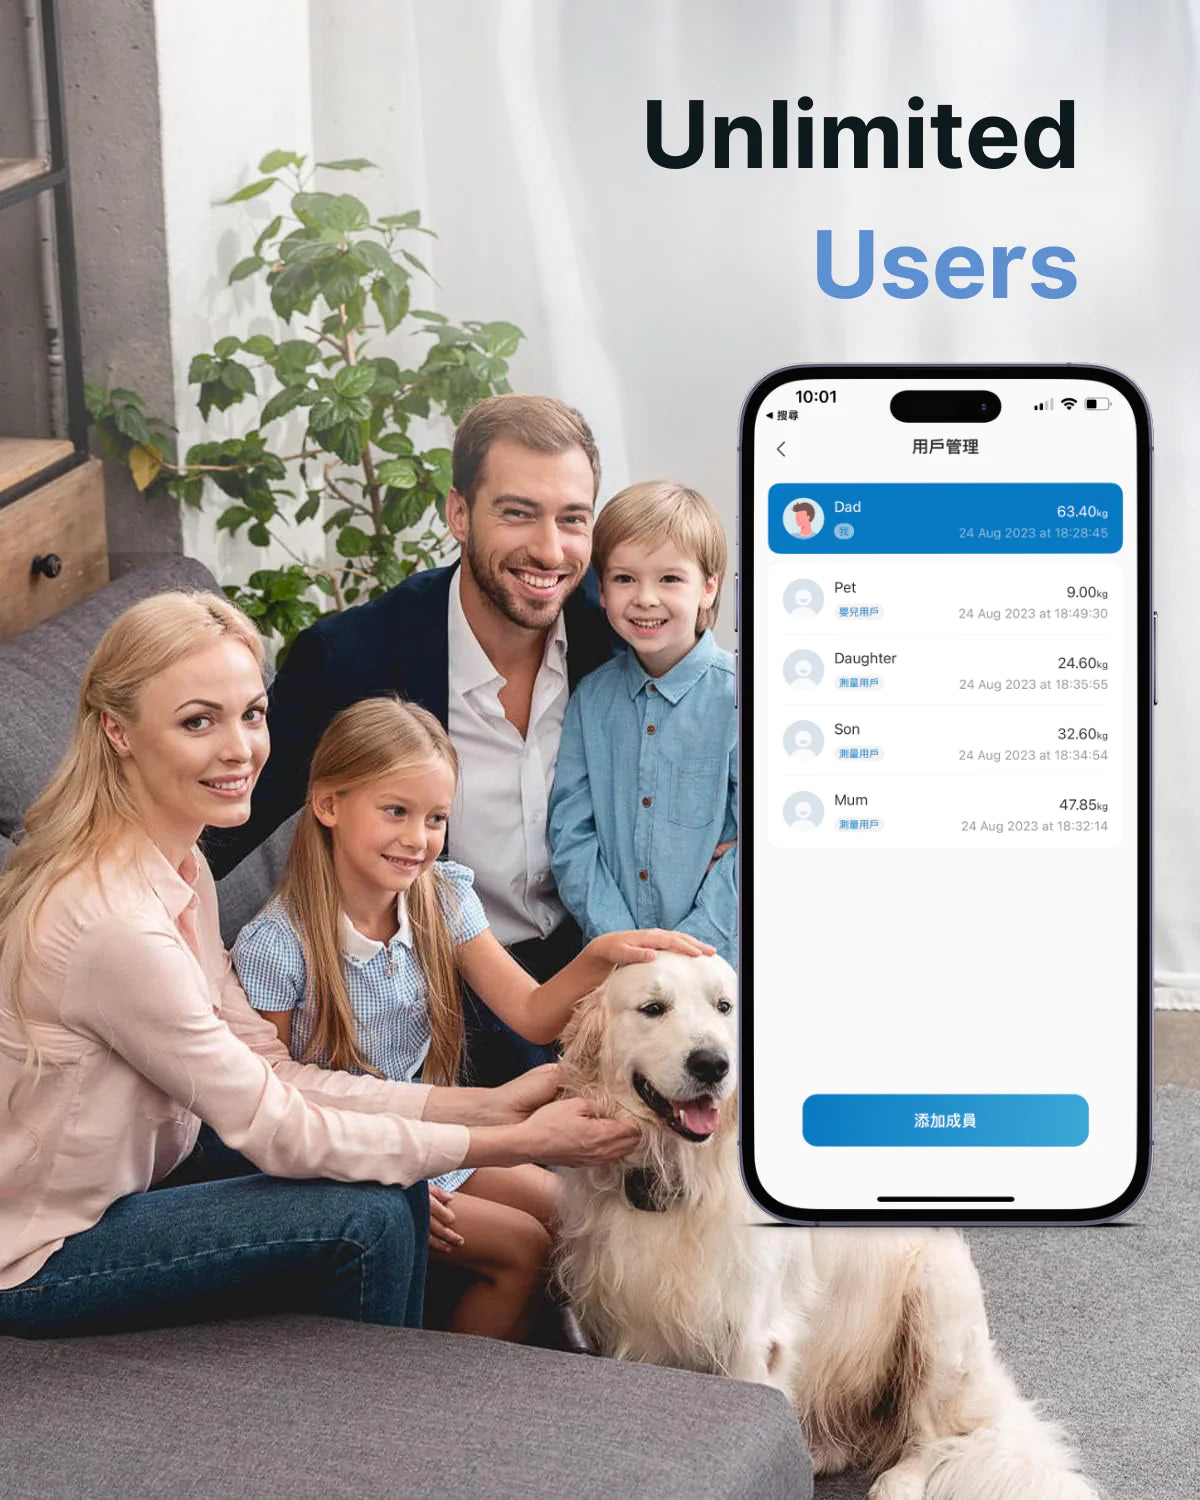 A happy family with two adults, two children, and a golden retriever, sitting together in a living room. They are smiling at a smartphone displaying the Renpho Health app with profiles labeled Elis Aspire Smart Body Scale.